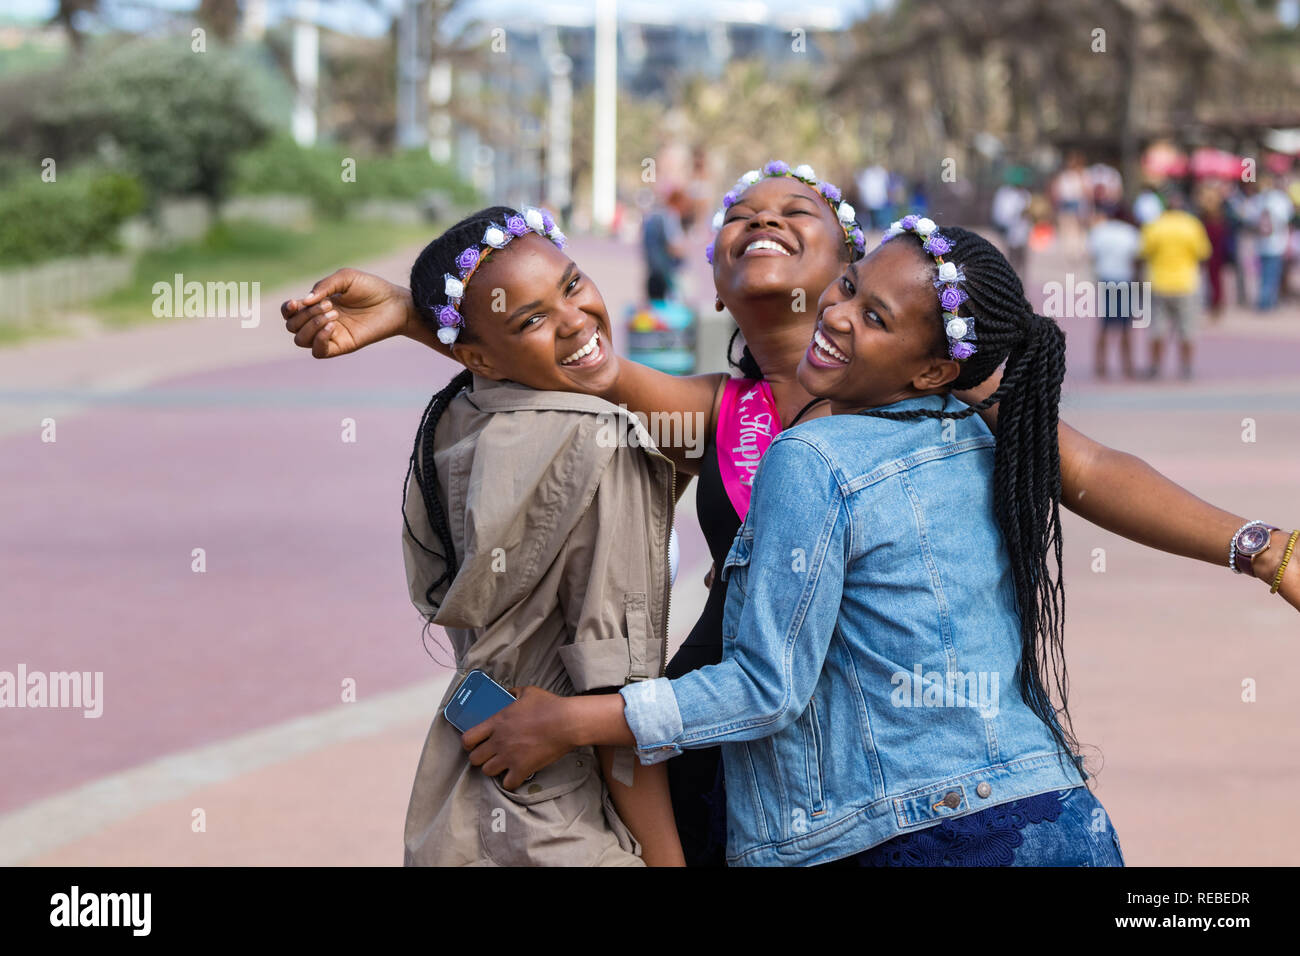 Durban, South Africa - January 07th, 2019: Three beautiful black young women laughing and celebrating a birthday outdoors in Durban, South Africa. Stock Photo